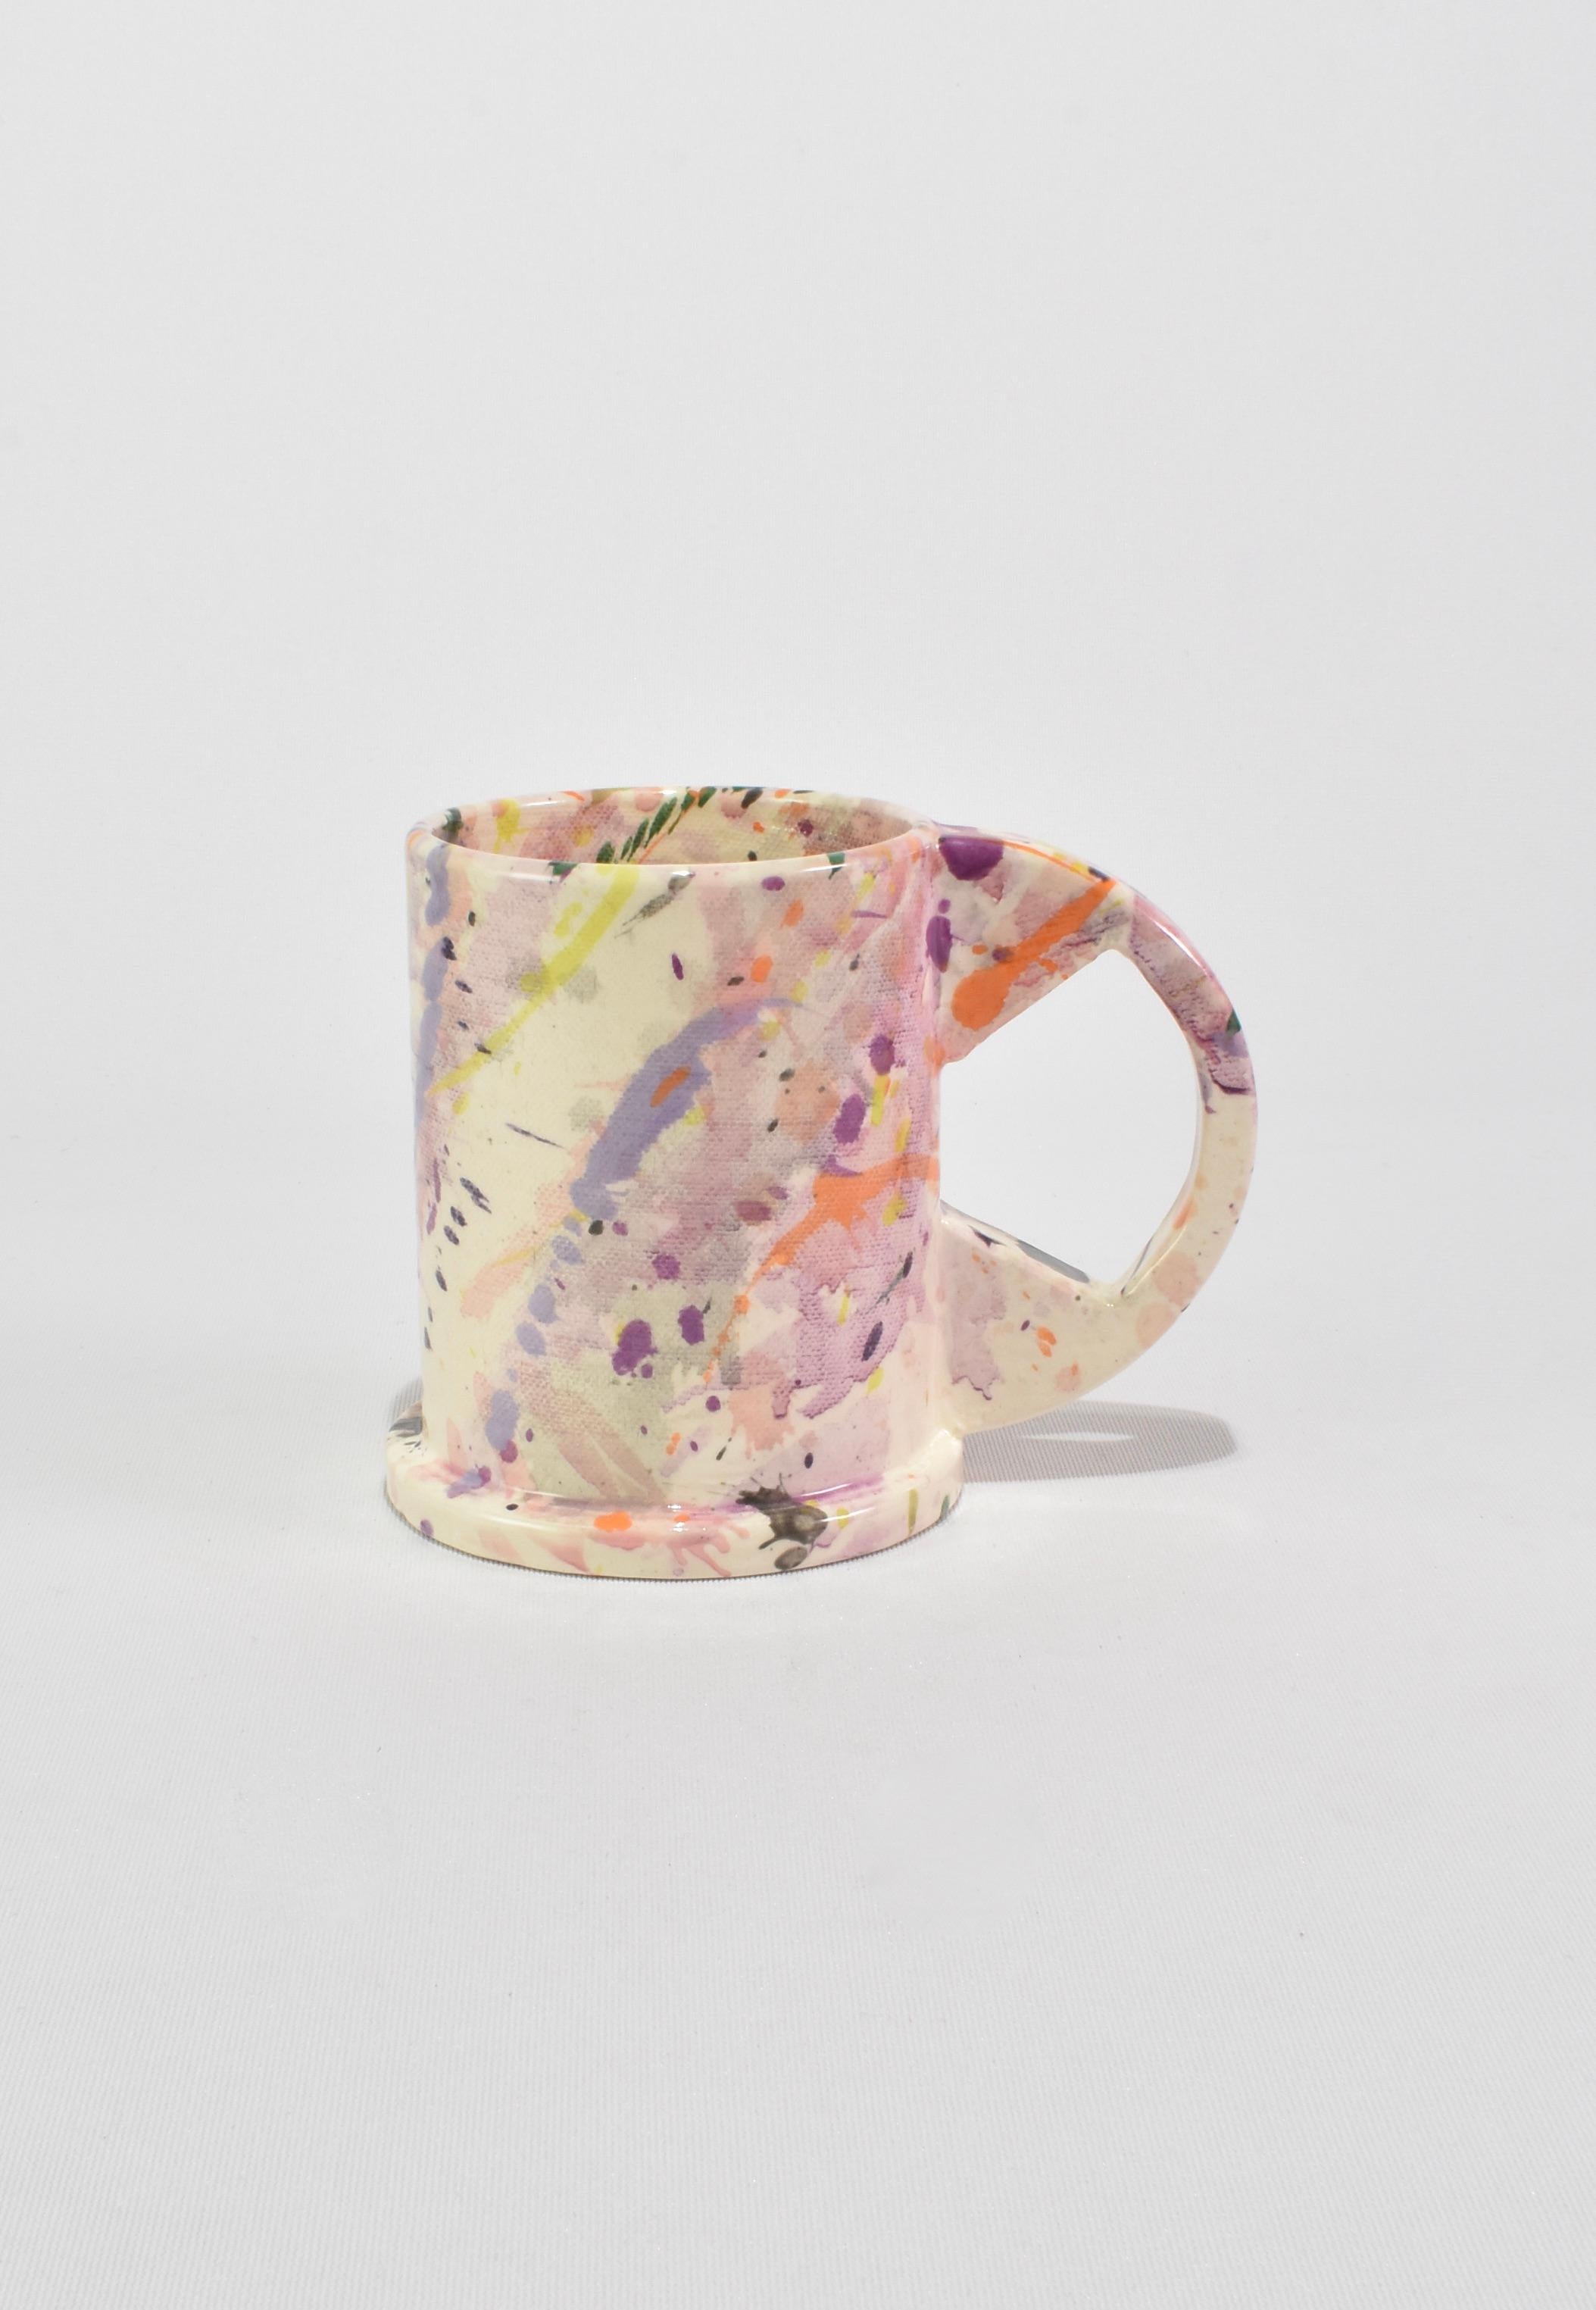 Tall Peter Shire Splatter Mug In New Condition For Sale In Richmond, VA